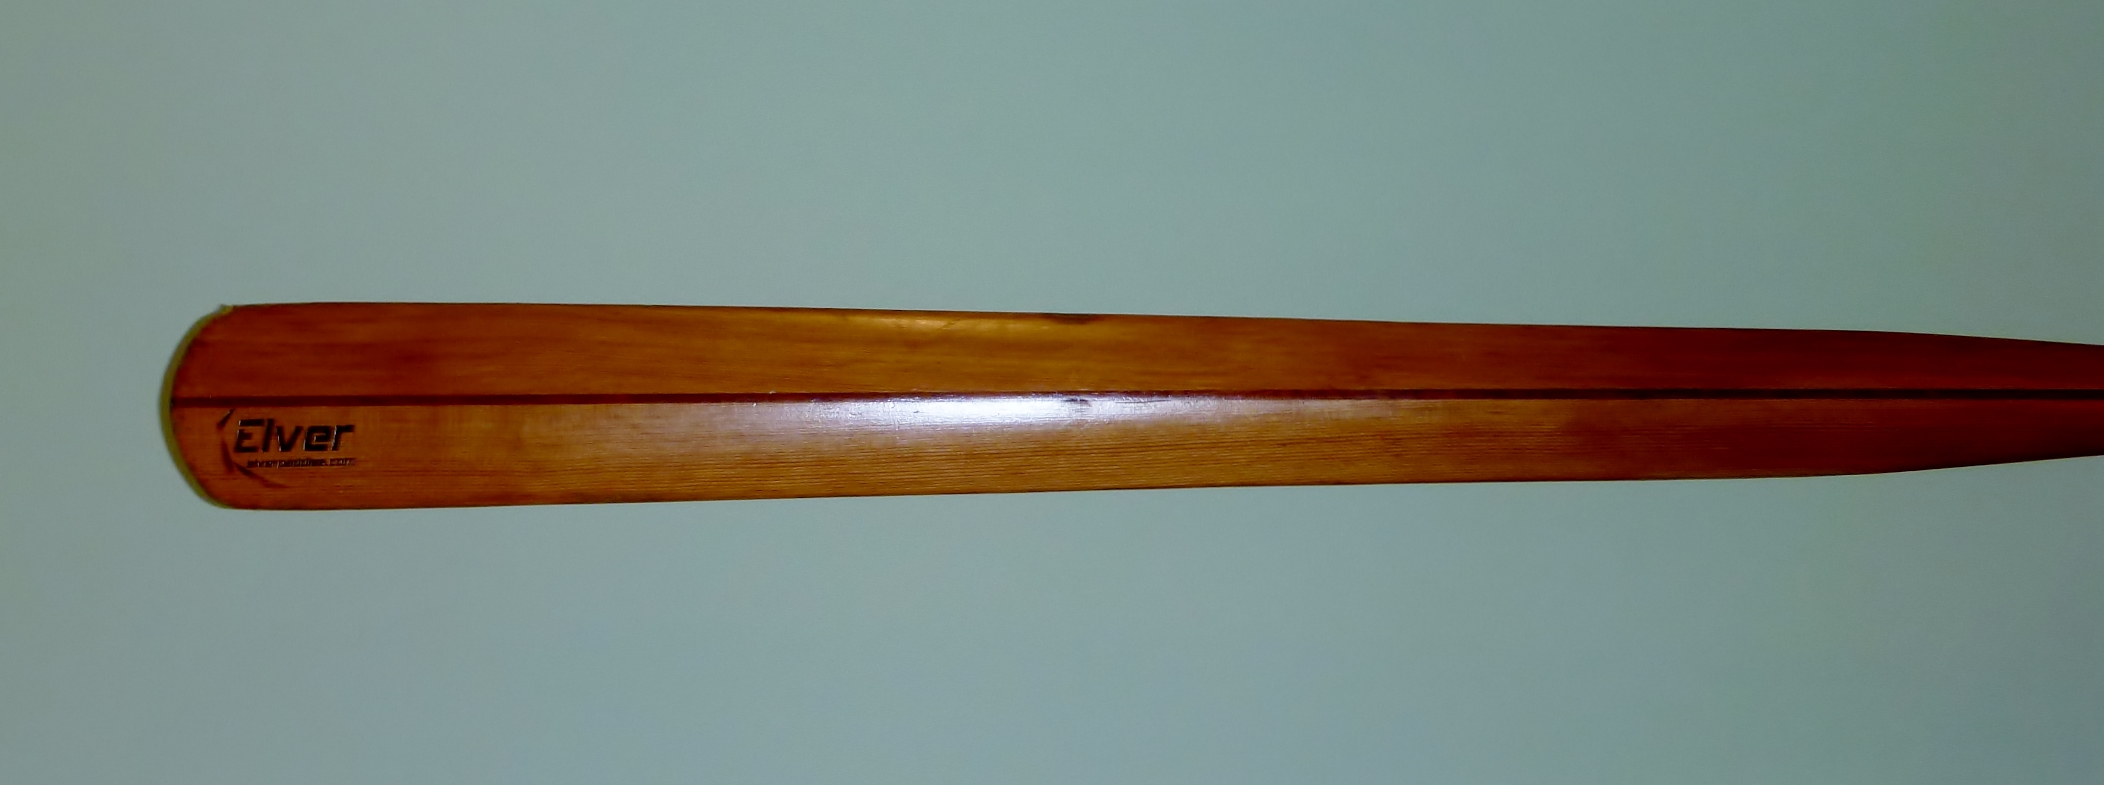 Elver Greenland paddle. Made in Australia